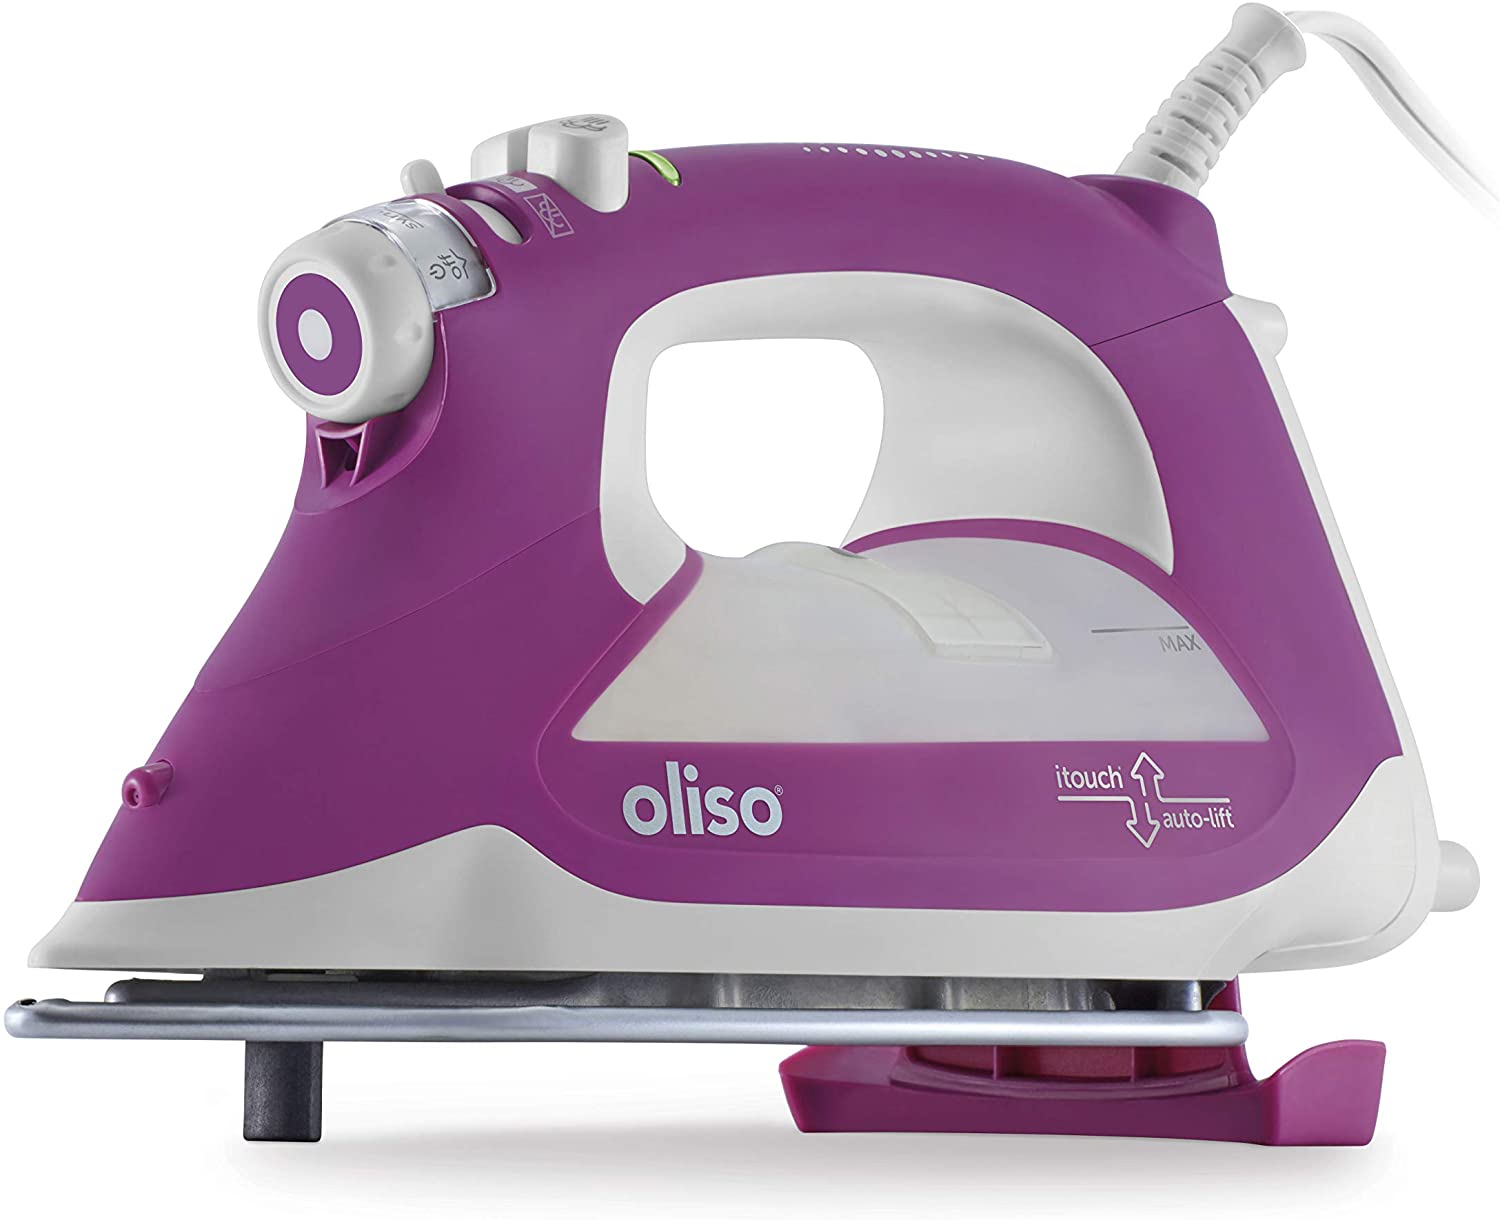 Oliso TG1100 Smart Iron with iTouch Technology